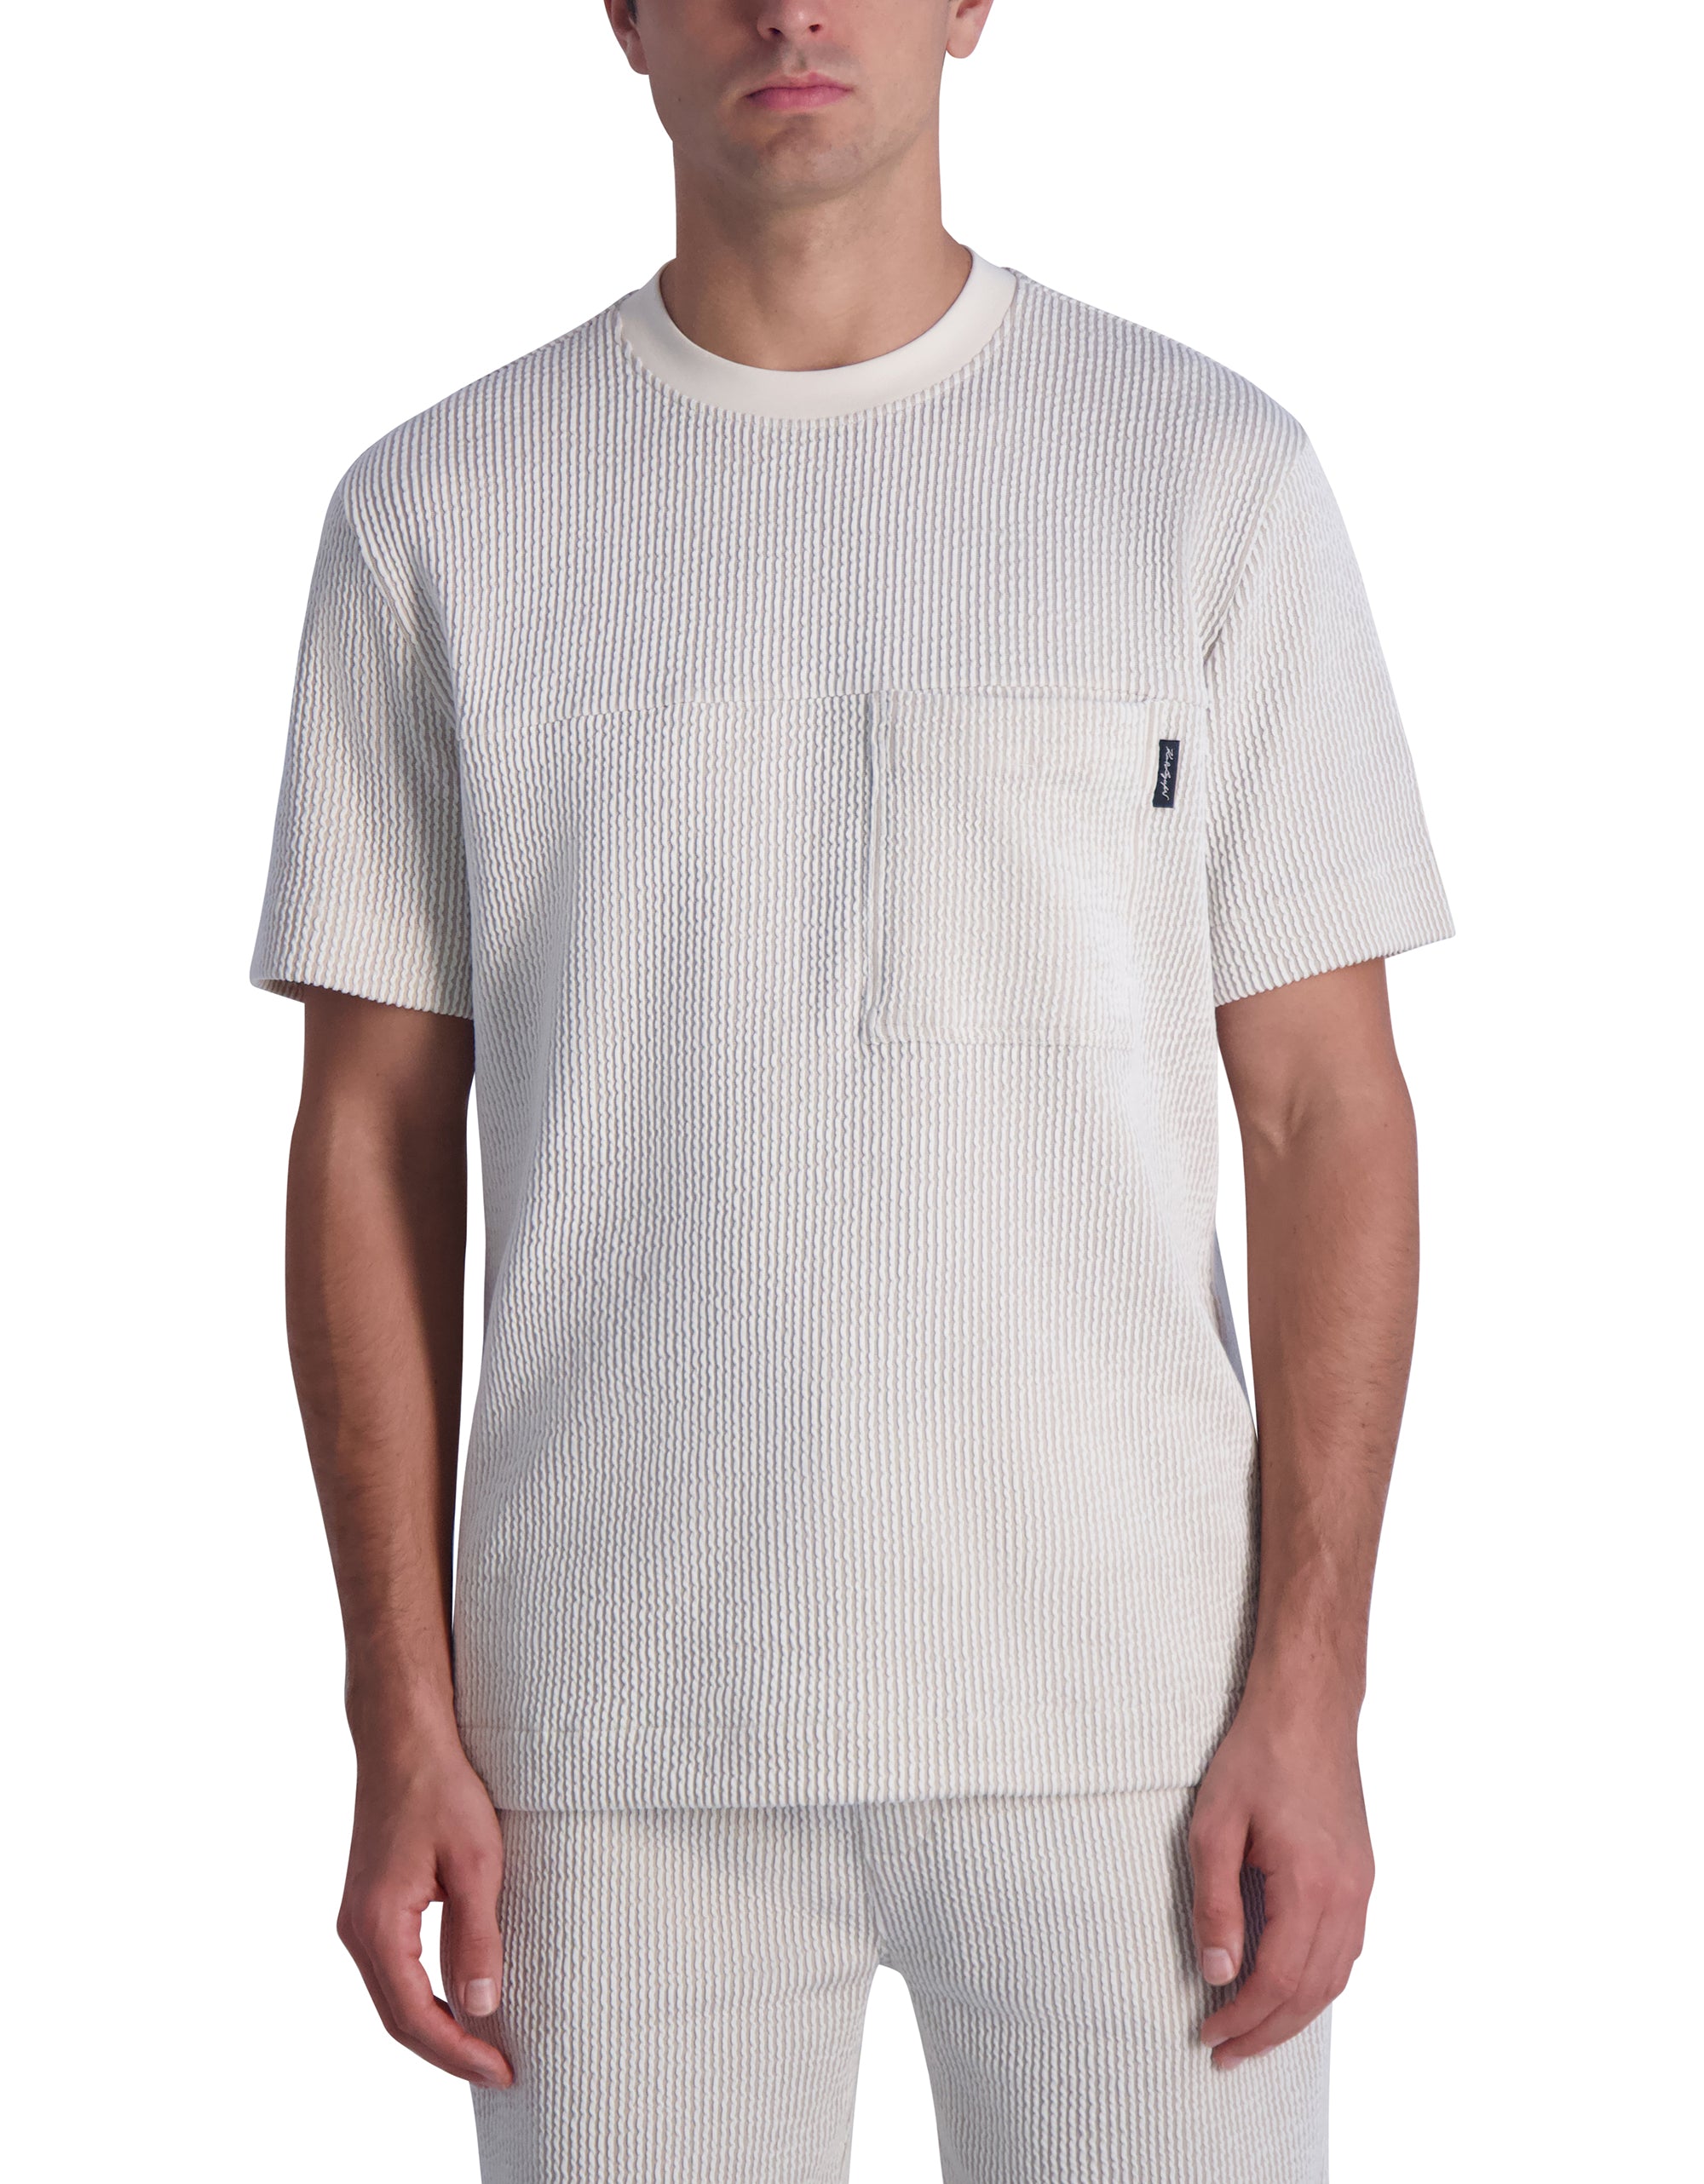 TEXTURED OVERSIZED T-SHIRT WITH CHEST POCKET Karl Lagerfeld Paris